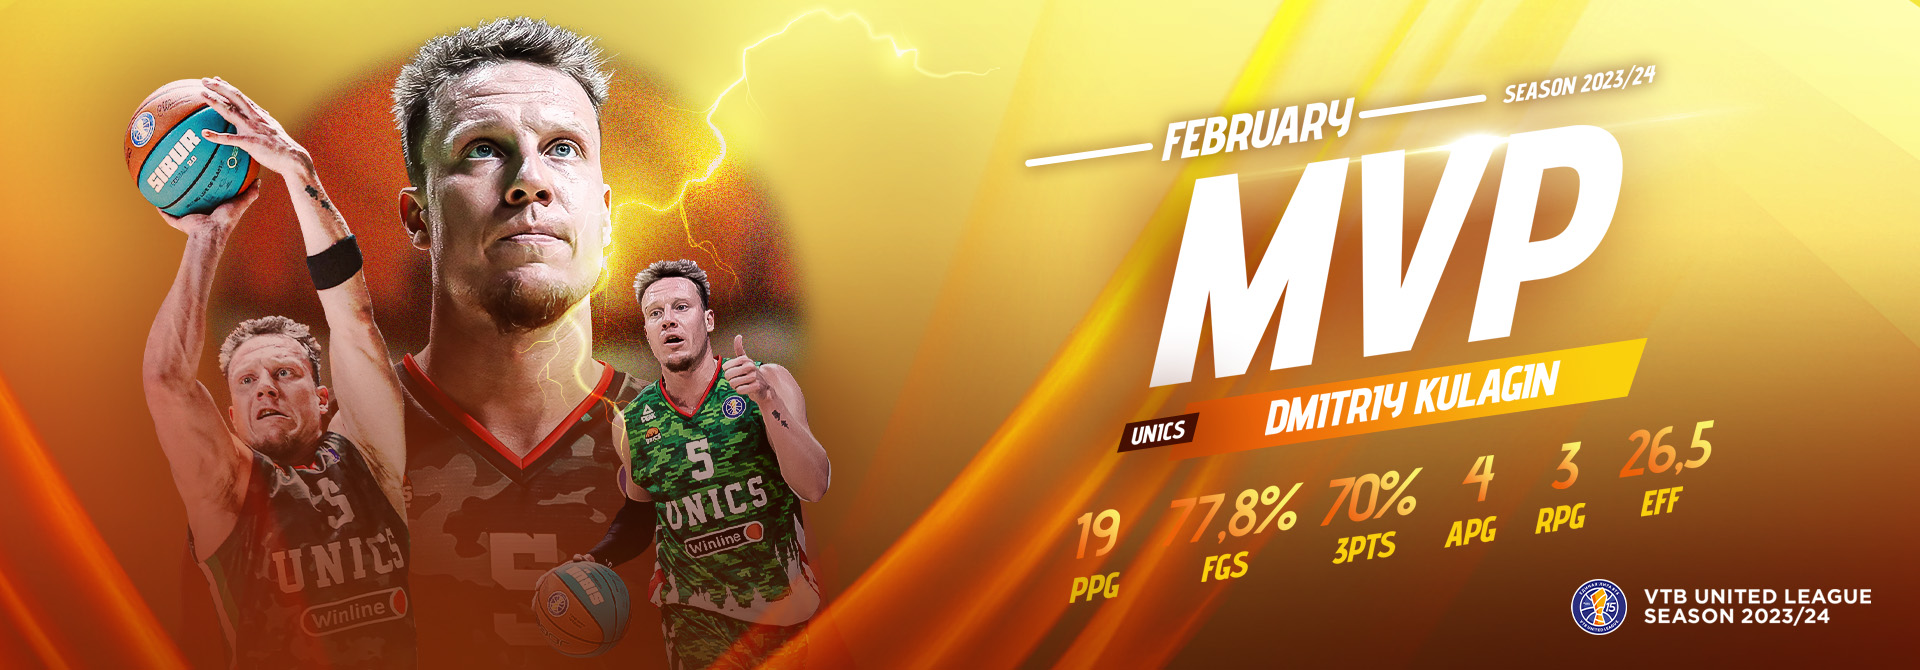 Dmitry Kulagin is the MVP of February in the VTB United League!